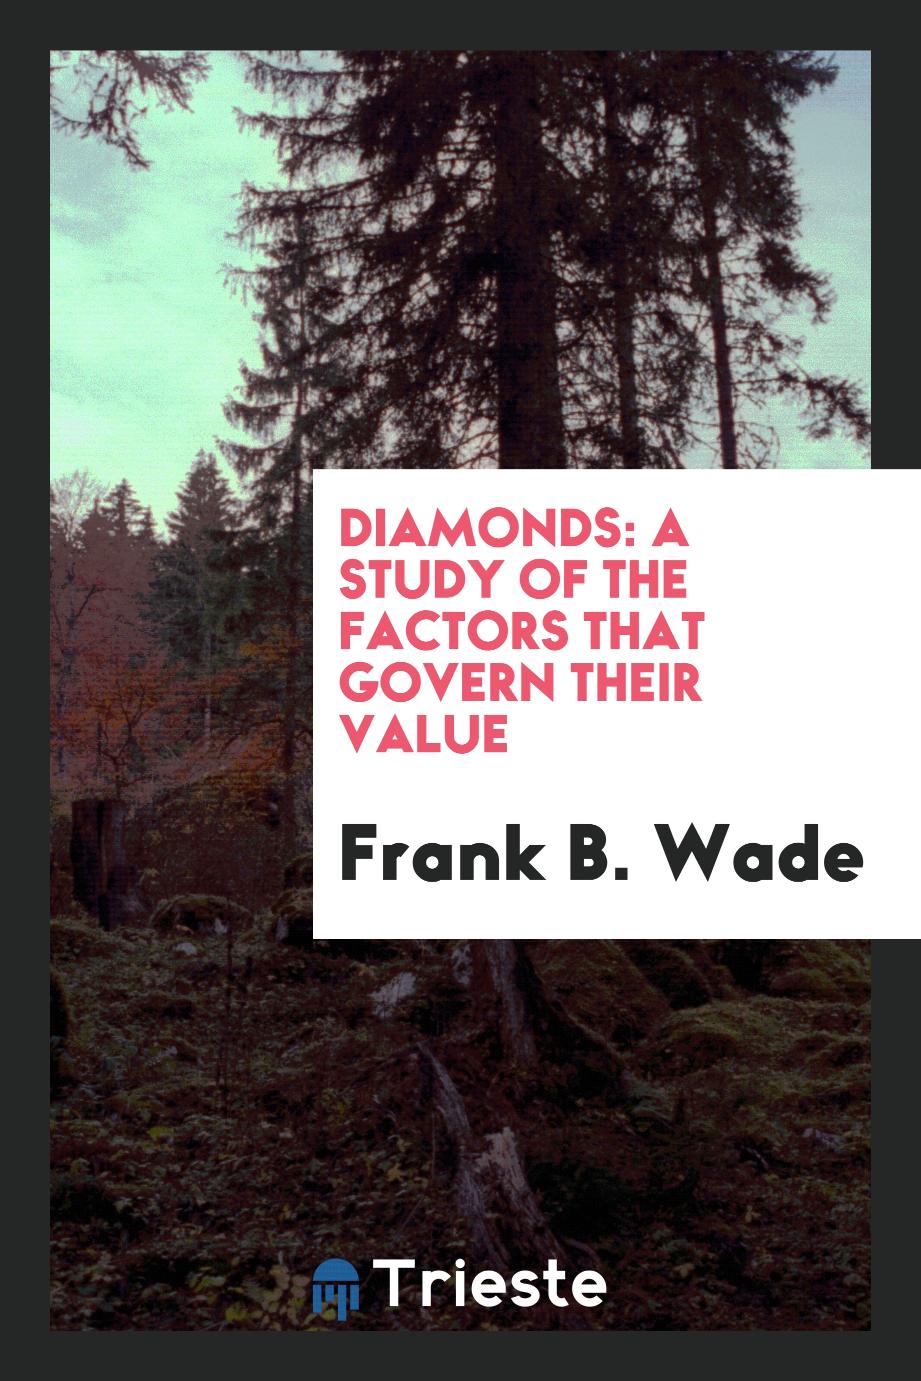 Diamonds: A Study of the Factors that Govern Their Value